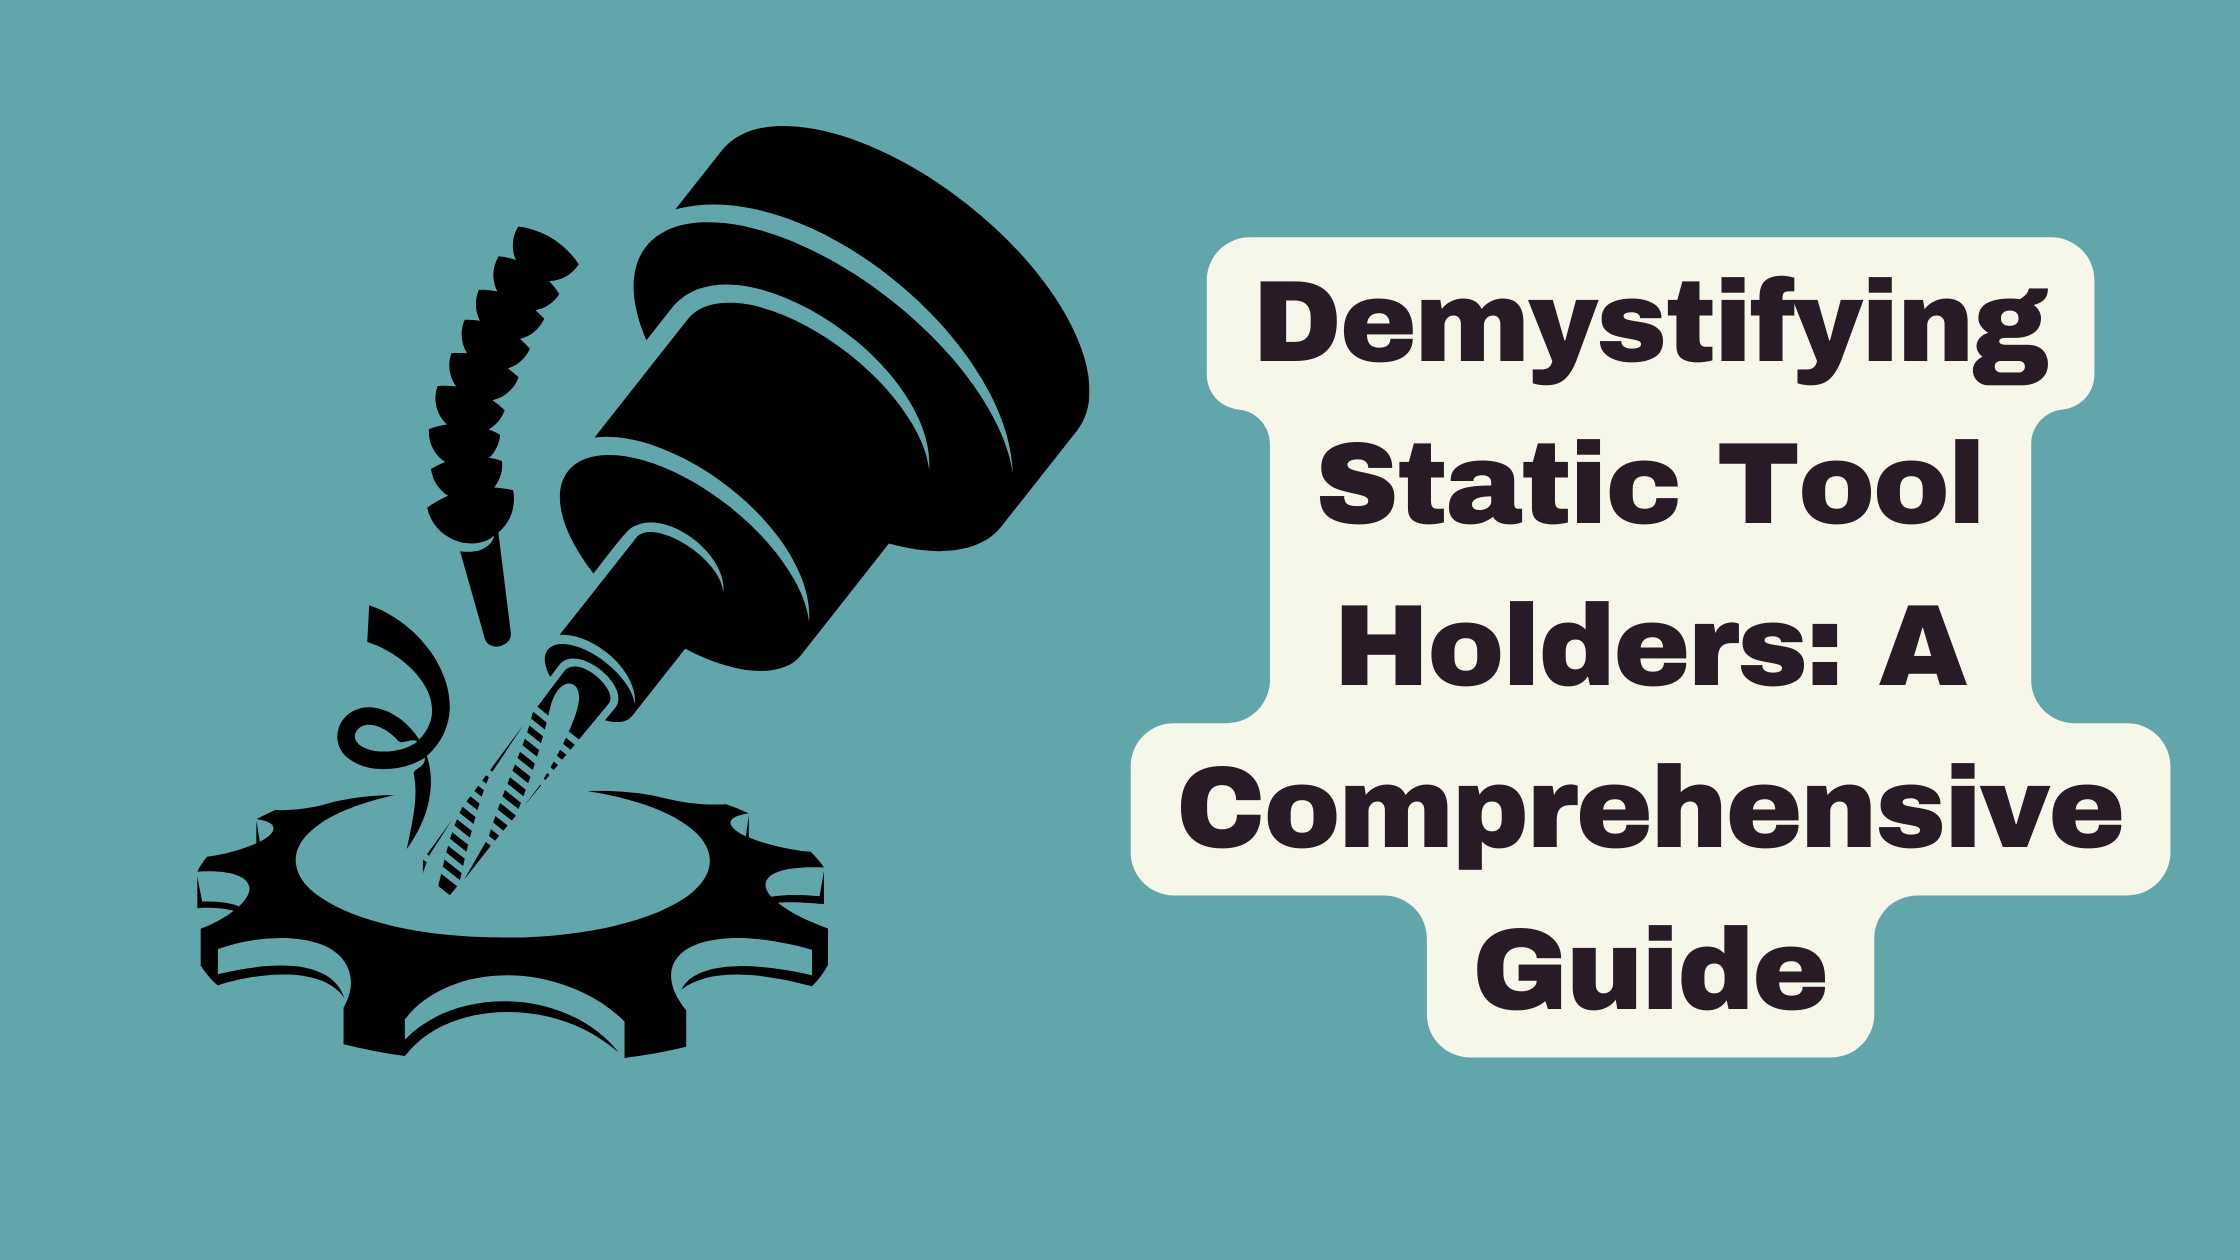 Demystifying Static Tool Holders: A Comprehensive Guide